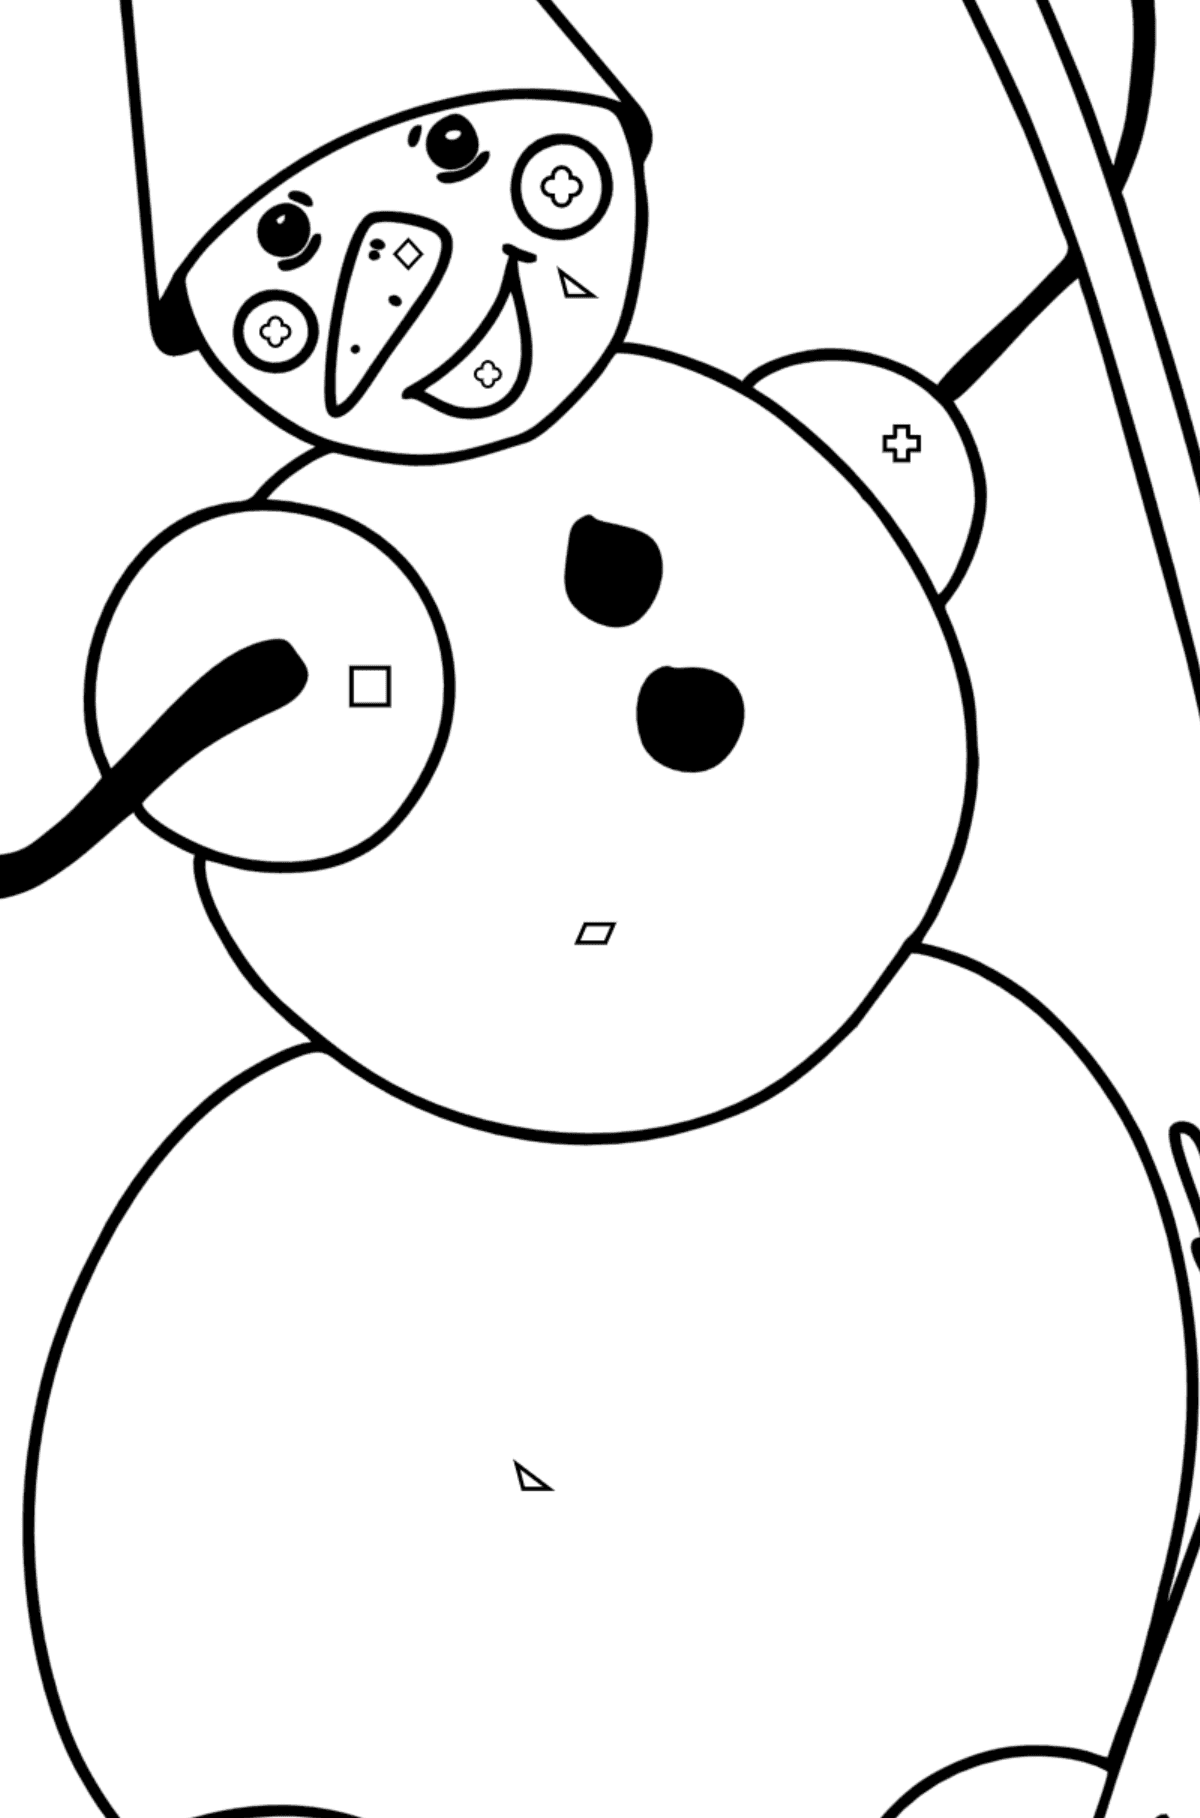 Snowman with Broom coloring page - Coloring by Geometric Shapes for Kids